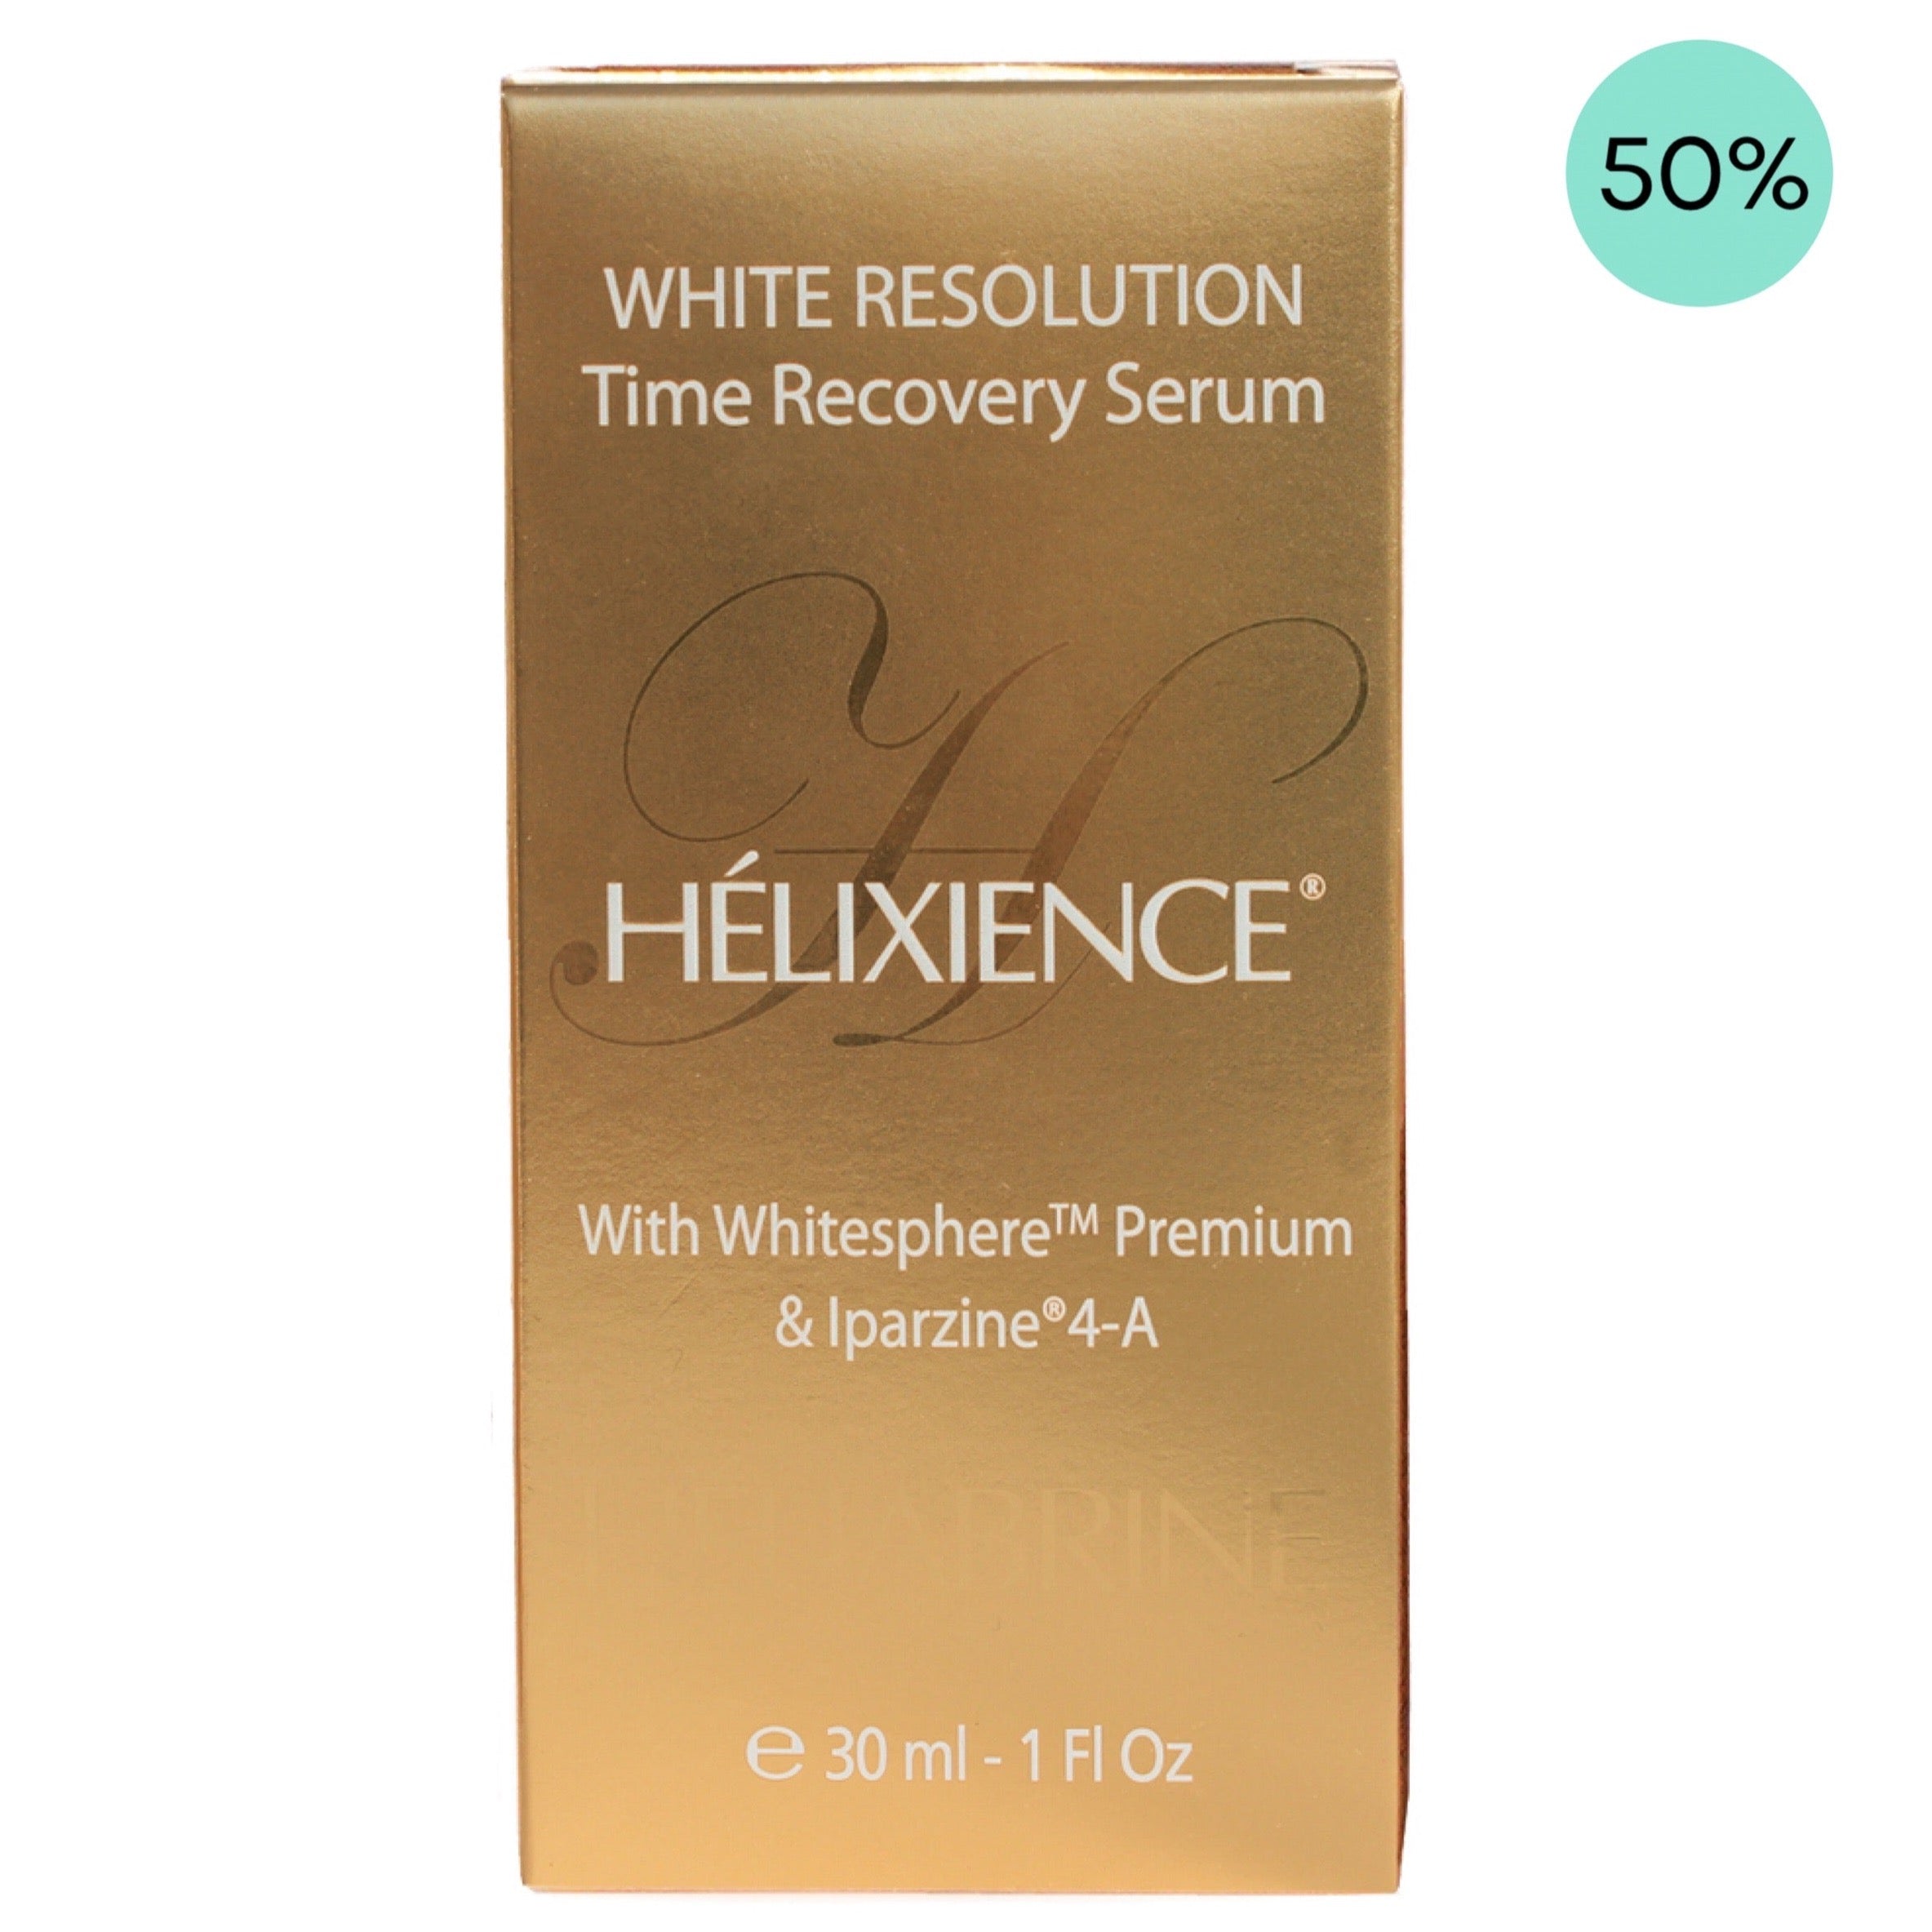 Helieixence Recovery Serum - White Resolution